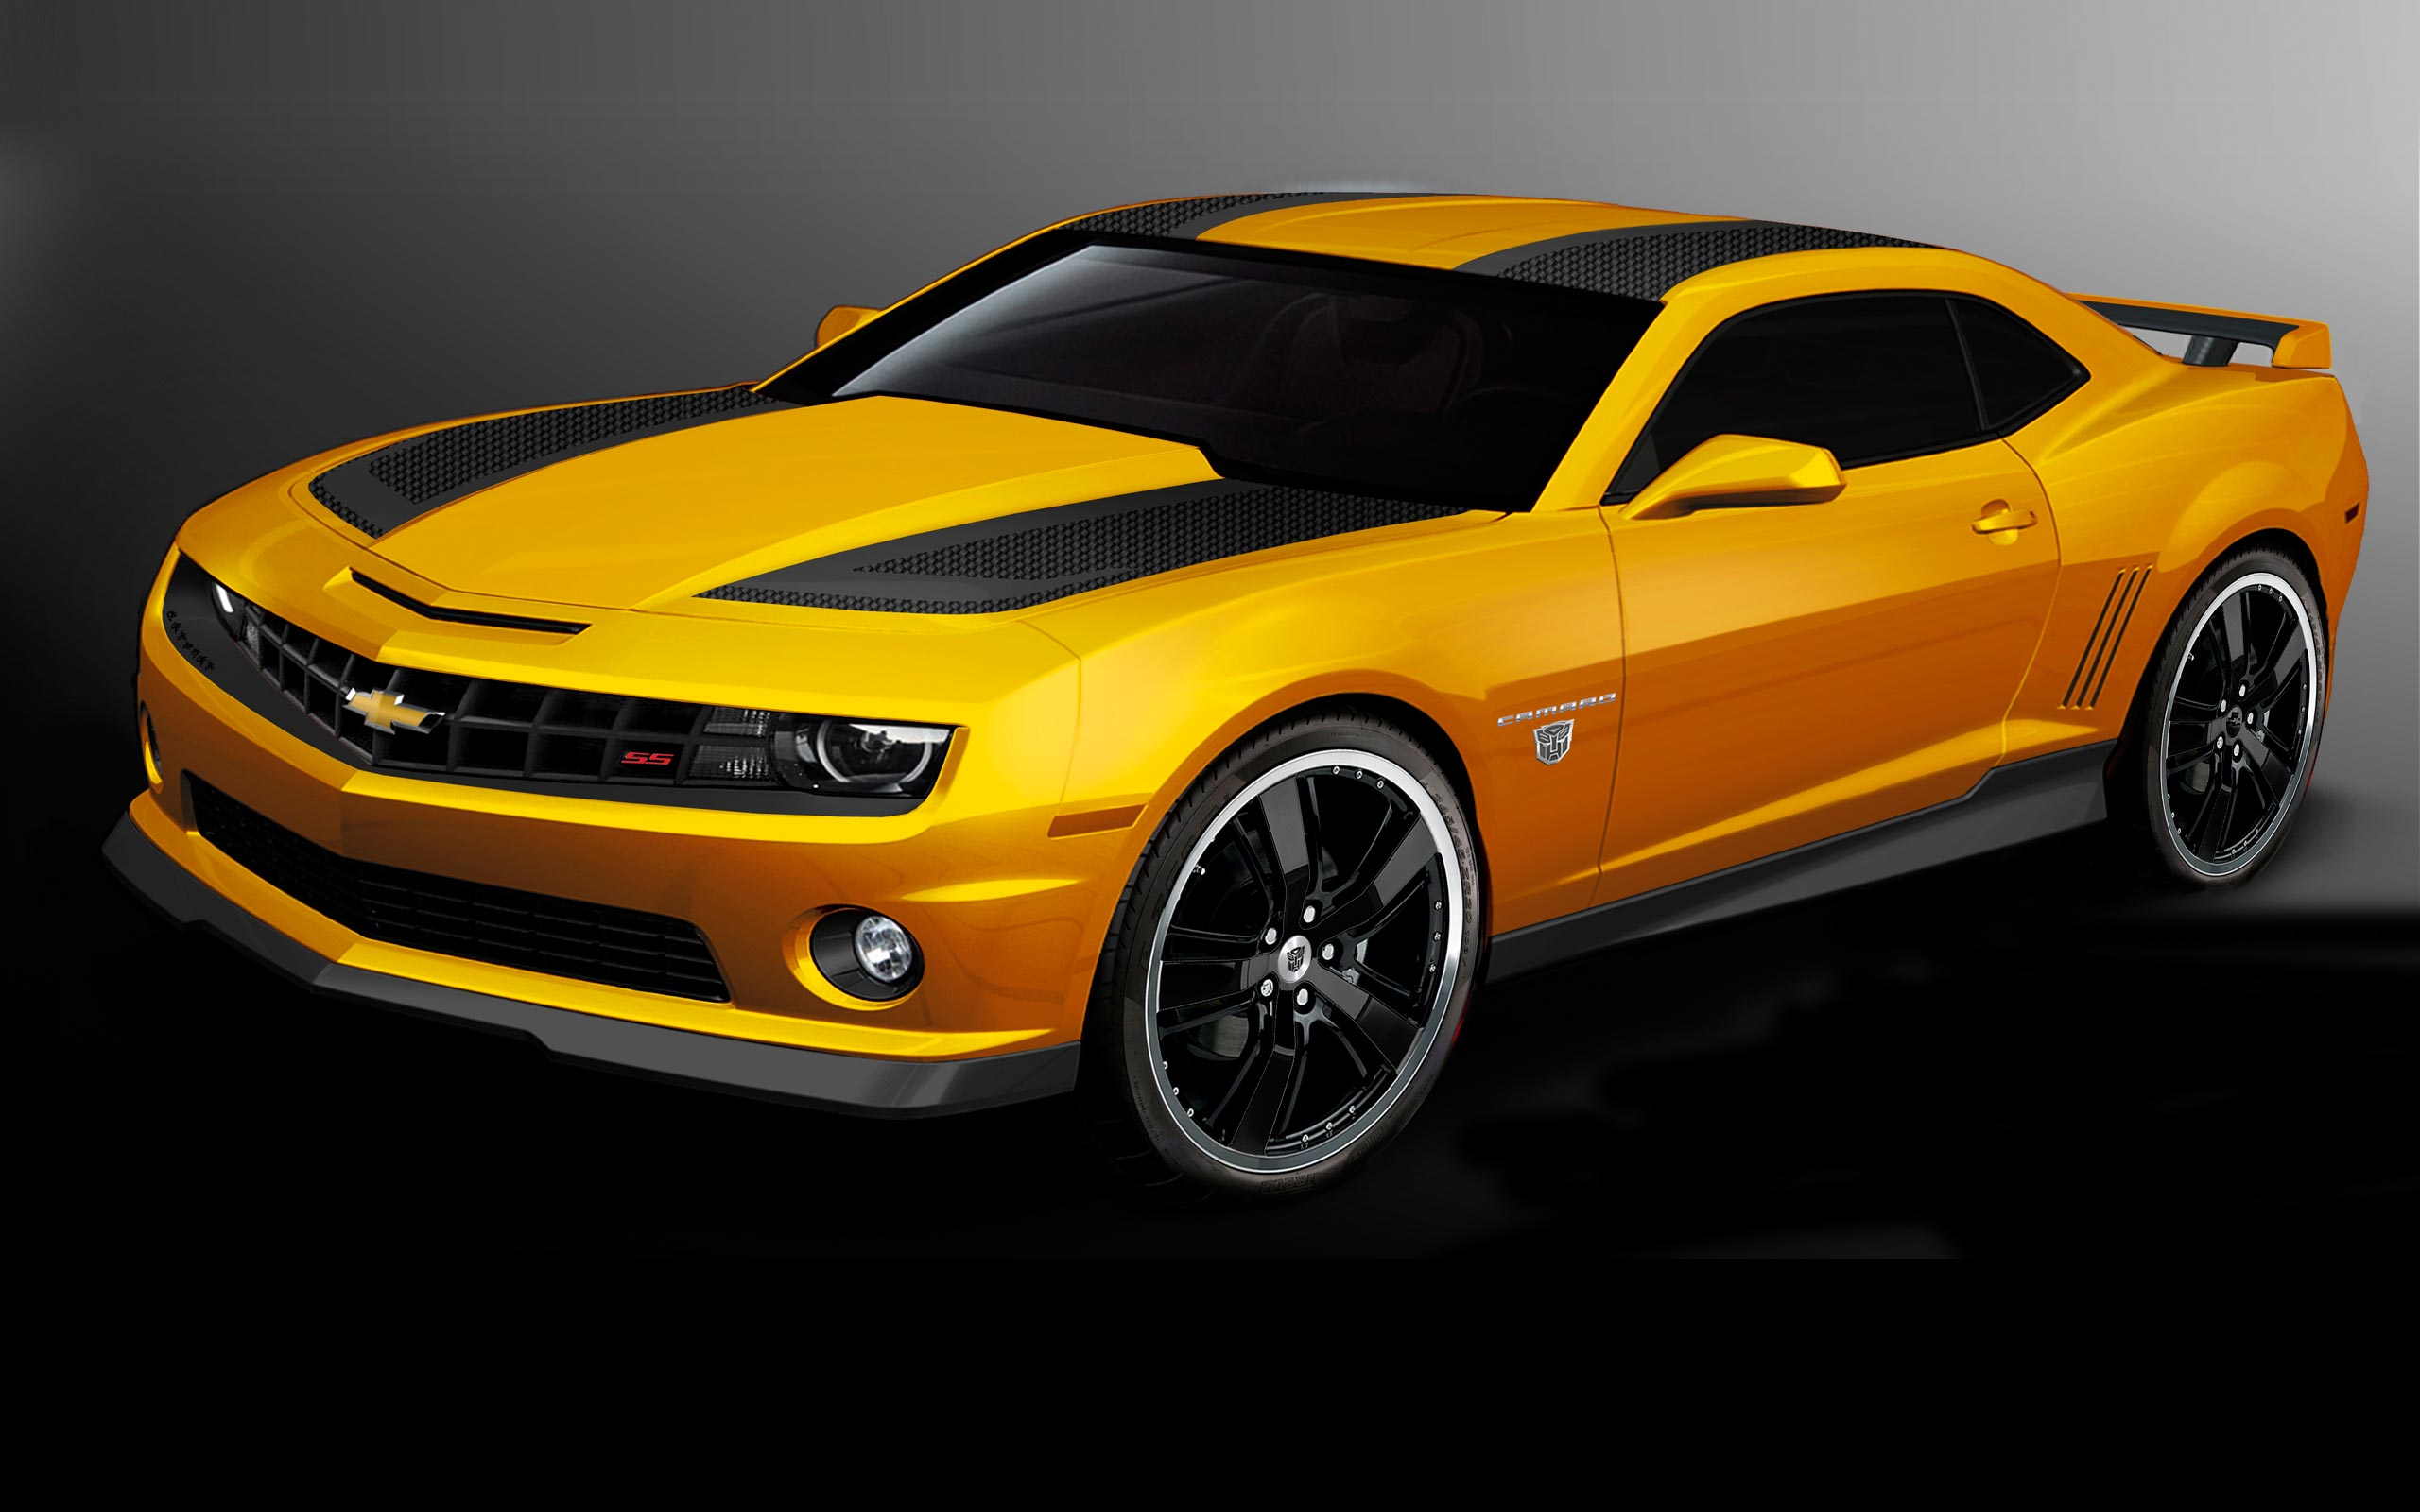 Car Camaro Bumblebee Hd Fast Cool Cars 245353 With Resolutions 2560